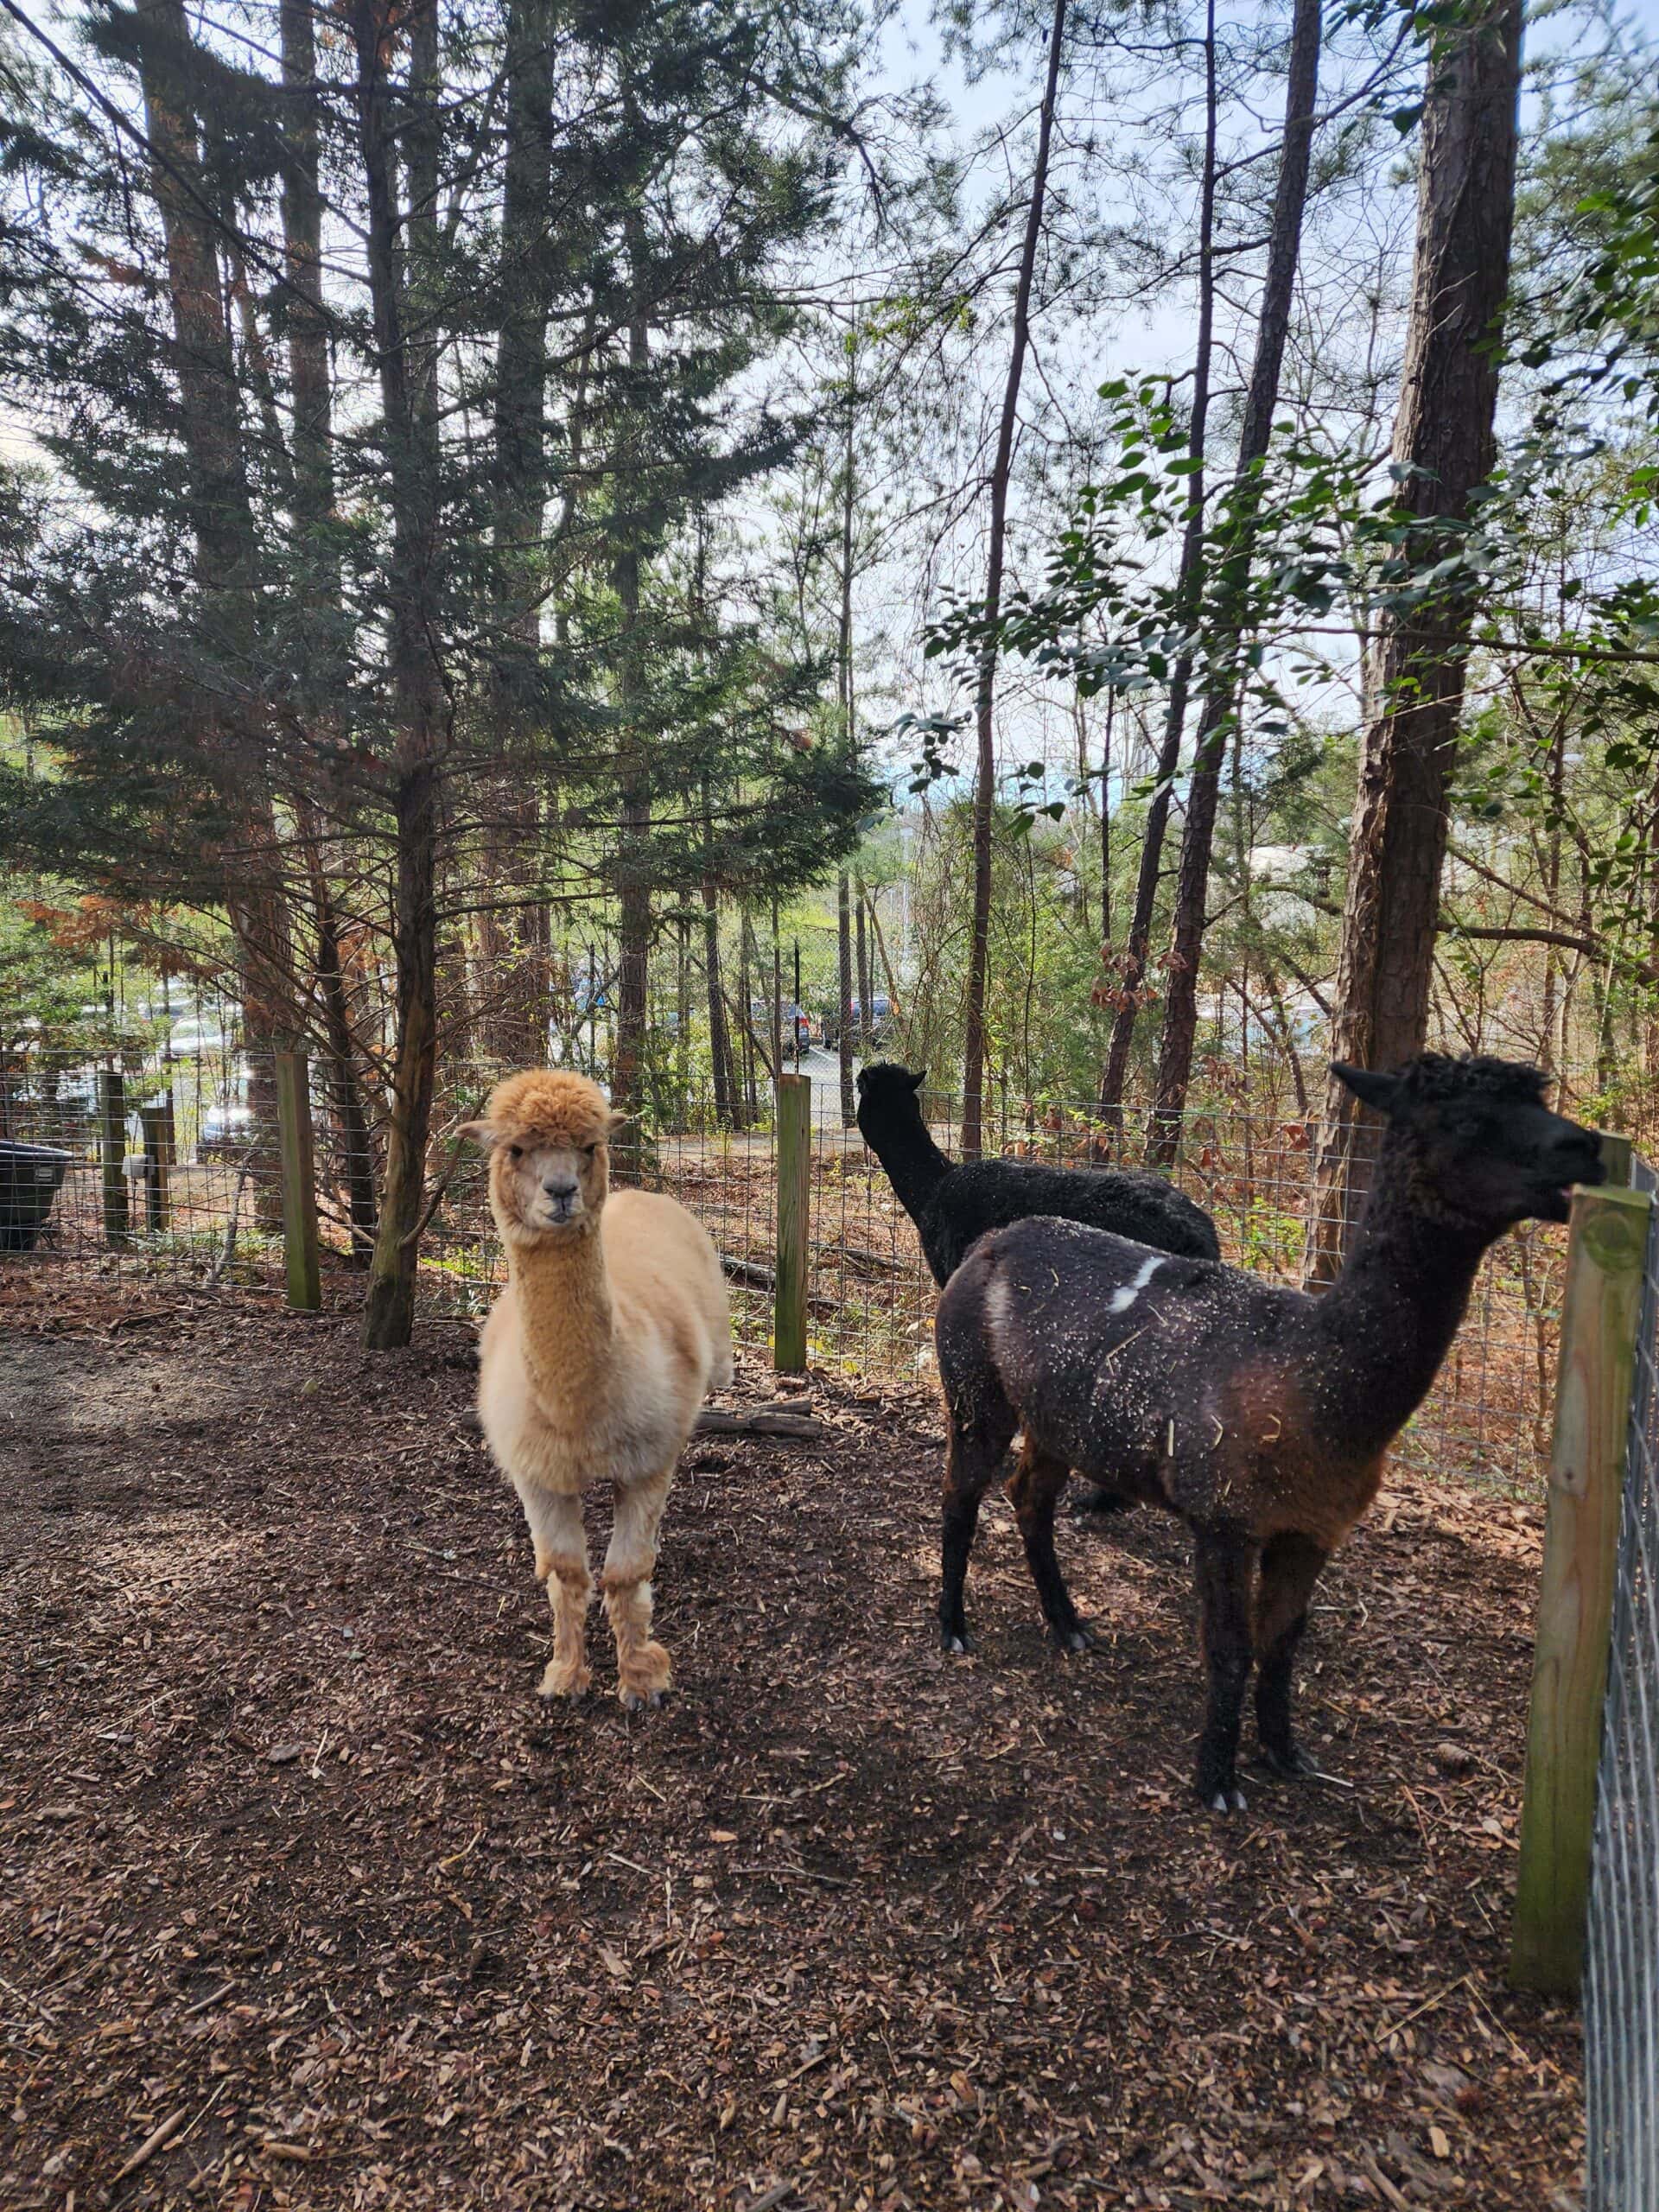 Two curious alpacas, one with a cream fleece and the other with a black coat, stand attentively in their natural, fenced habitat among tall pine trees, evoking a serene rural atmosphere.